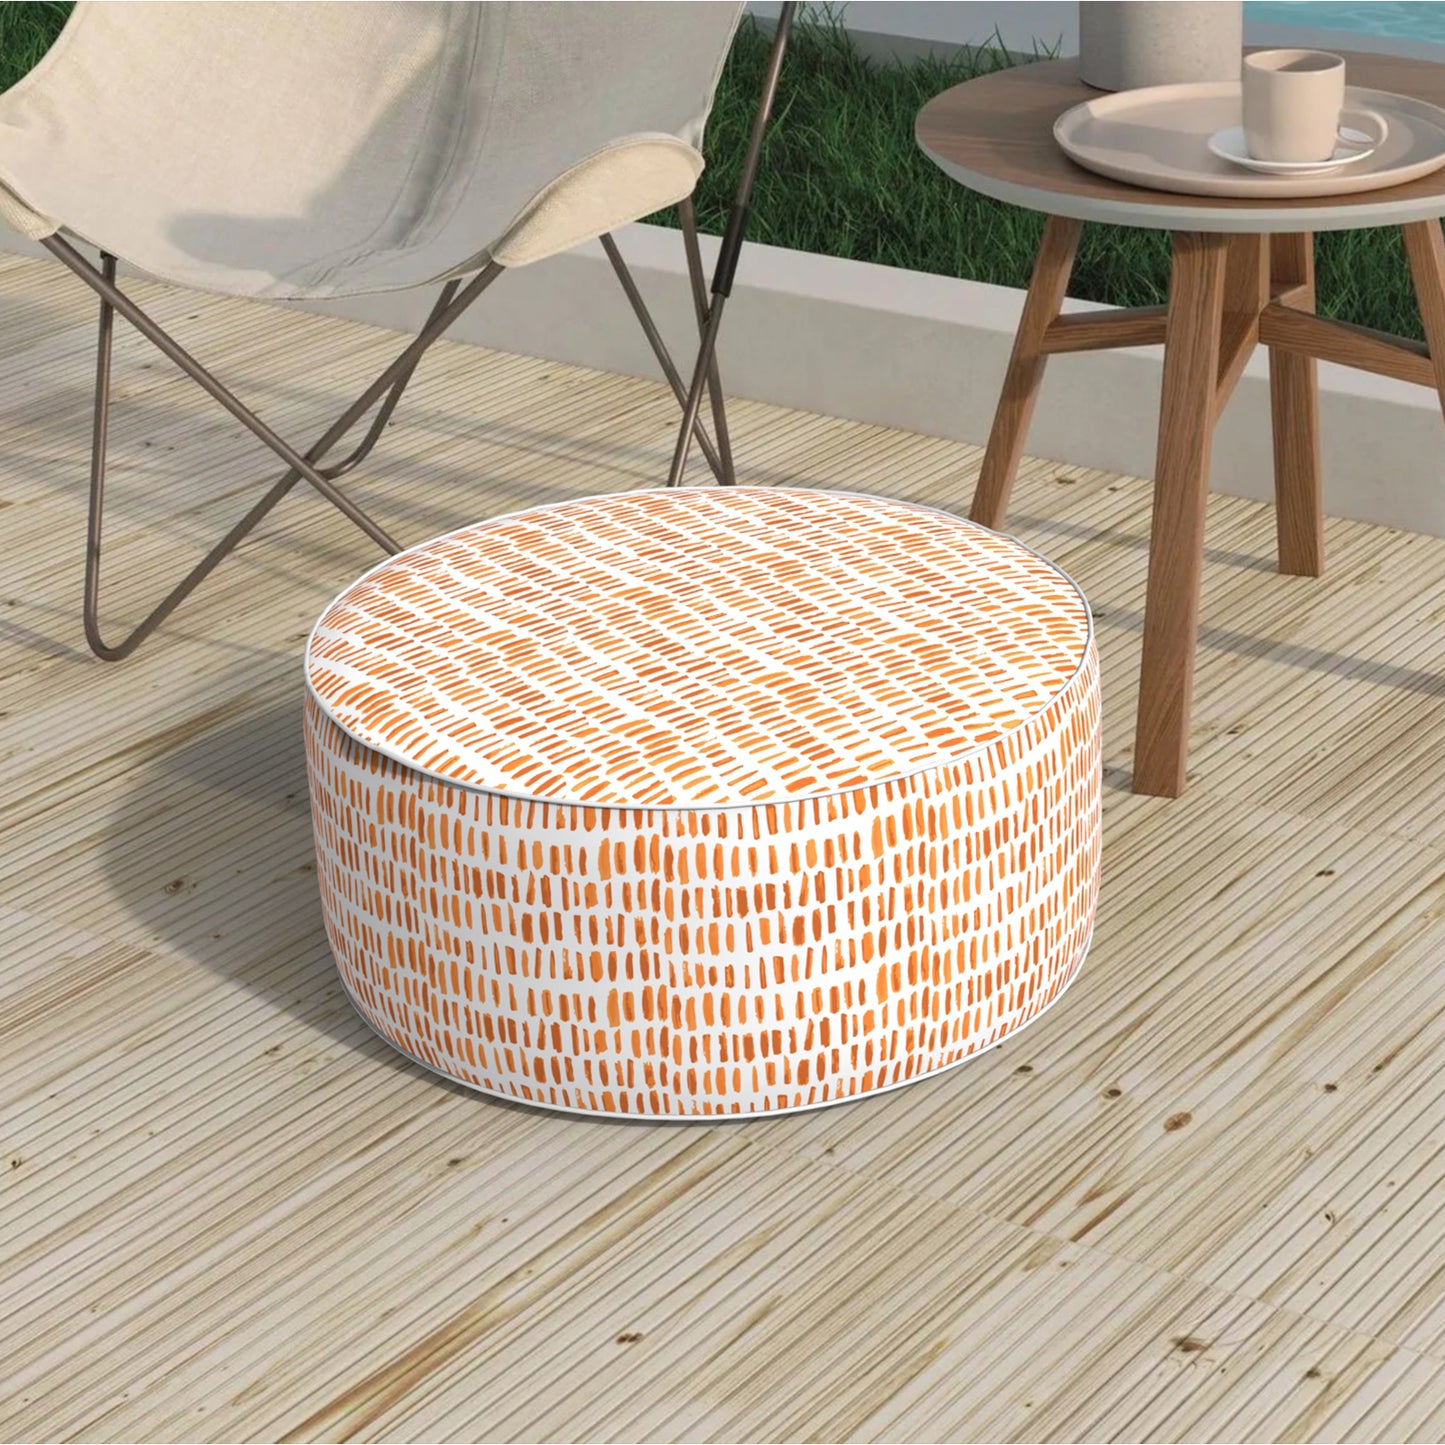 Melody Elephant Patio Inflatable Ottoman, 21x9 Inch Portable Stool Ottoman with Handle, Outdoor Round Footrest Stool for Garden Camping, Pebble Orange